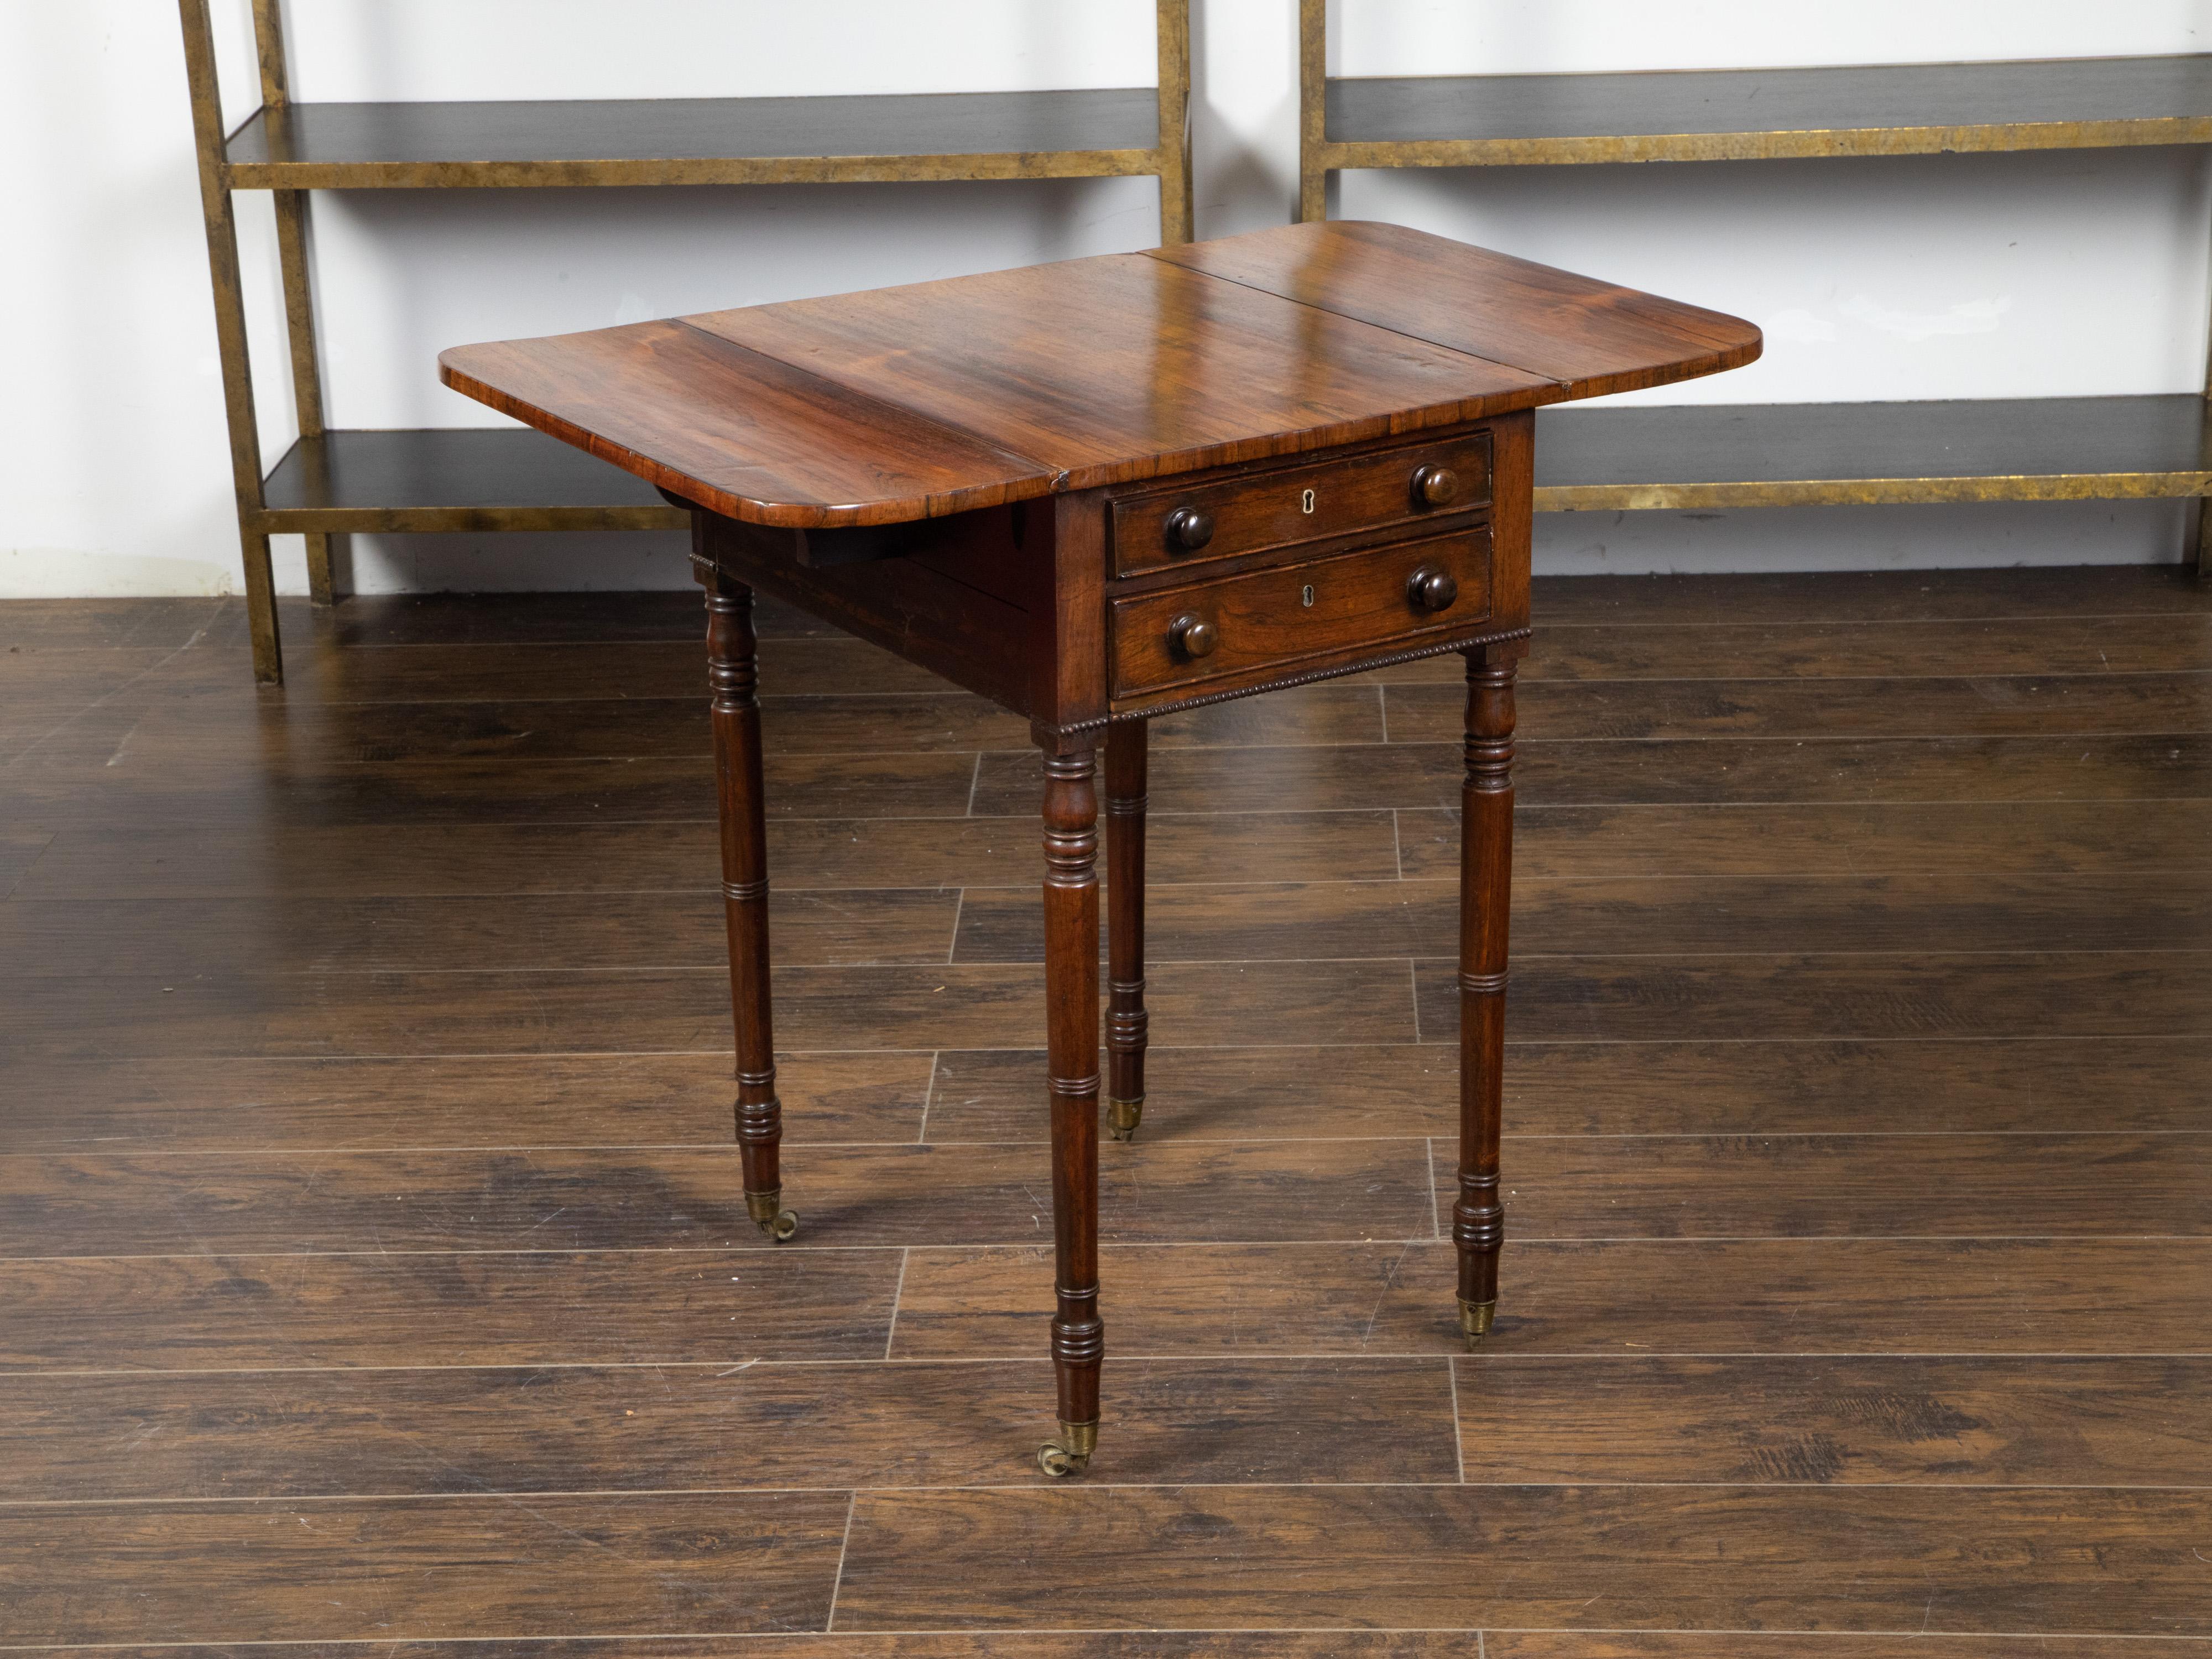 English Regency 1820s Mahogany Pembroke Table with Drop Leaves and Drawers For Sale 9